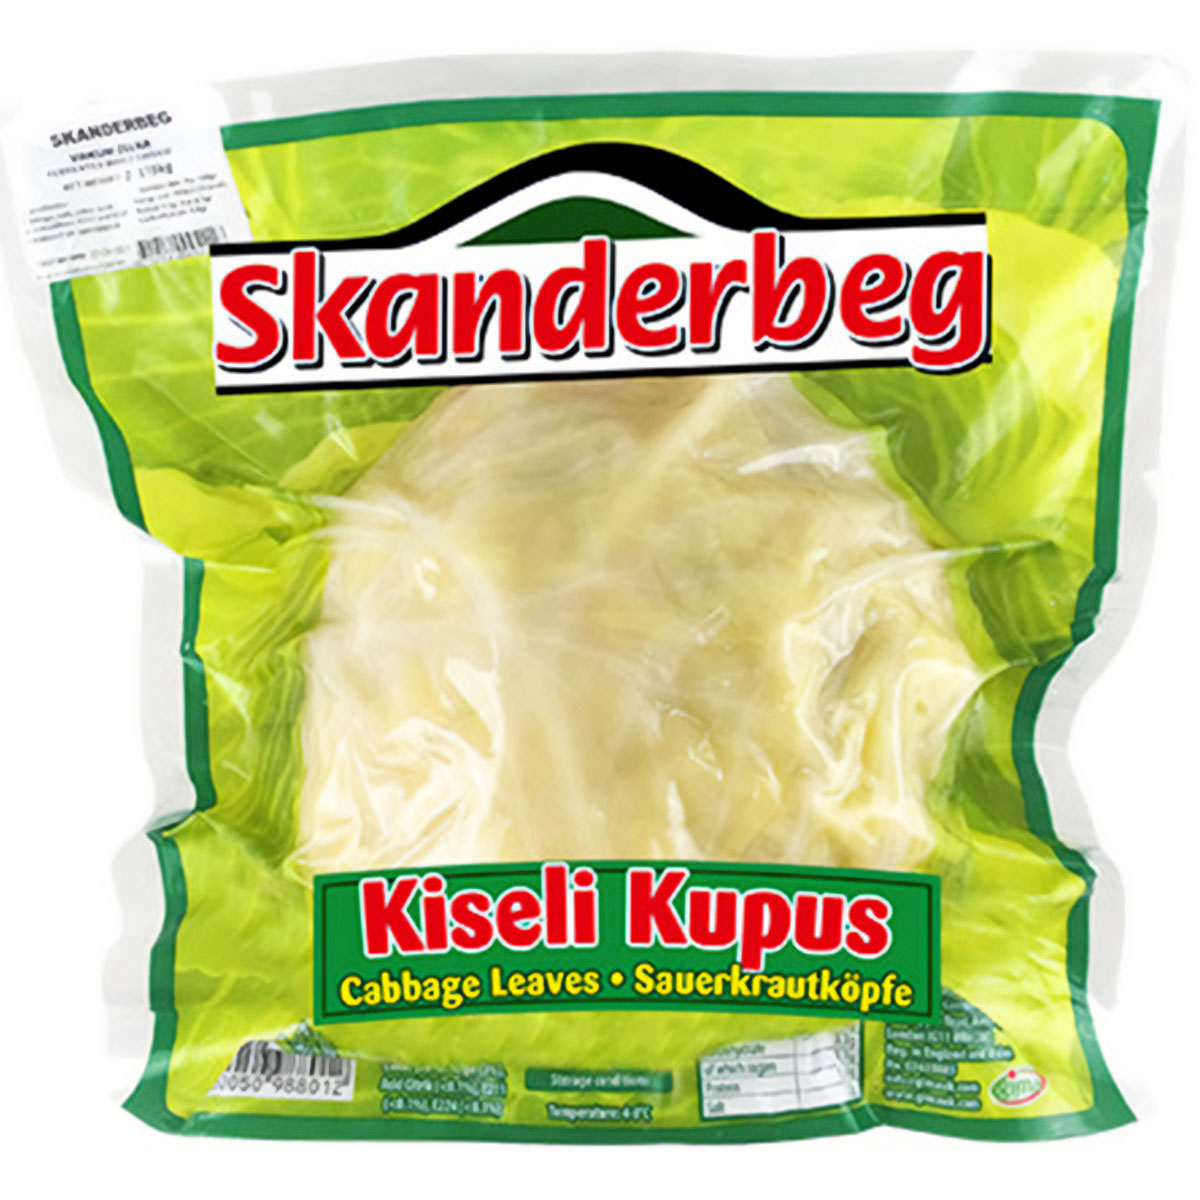 Skanderbeg - Fermented Whole Cabbage - 1.9kg-2.2kg - Continental Food Store